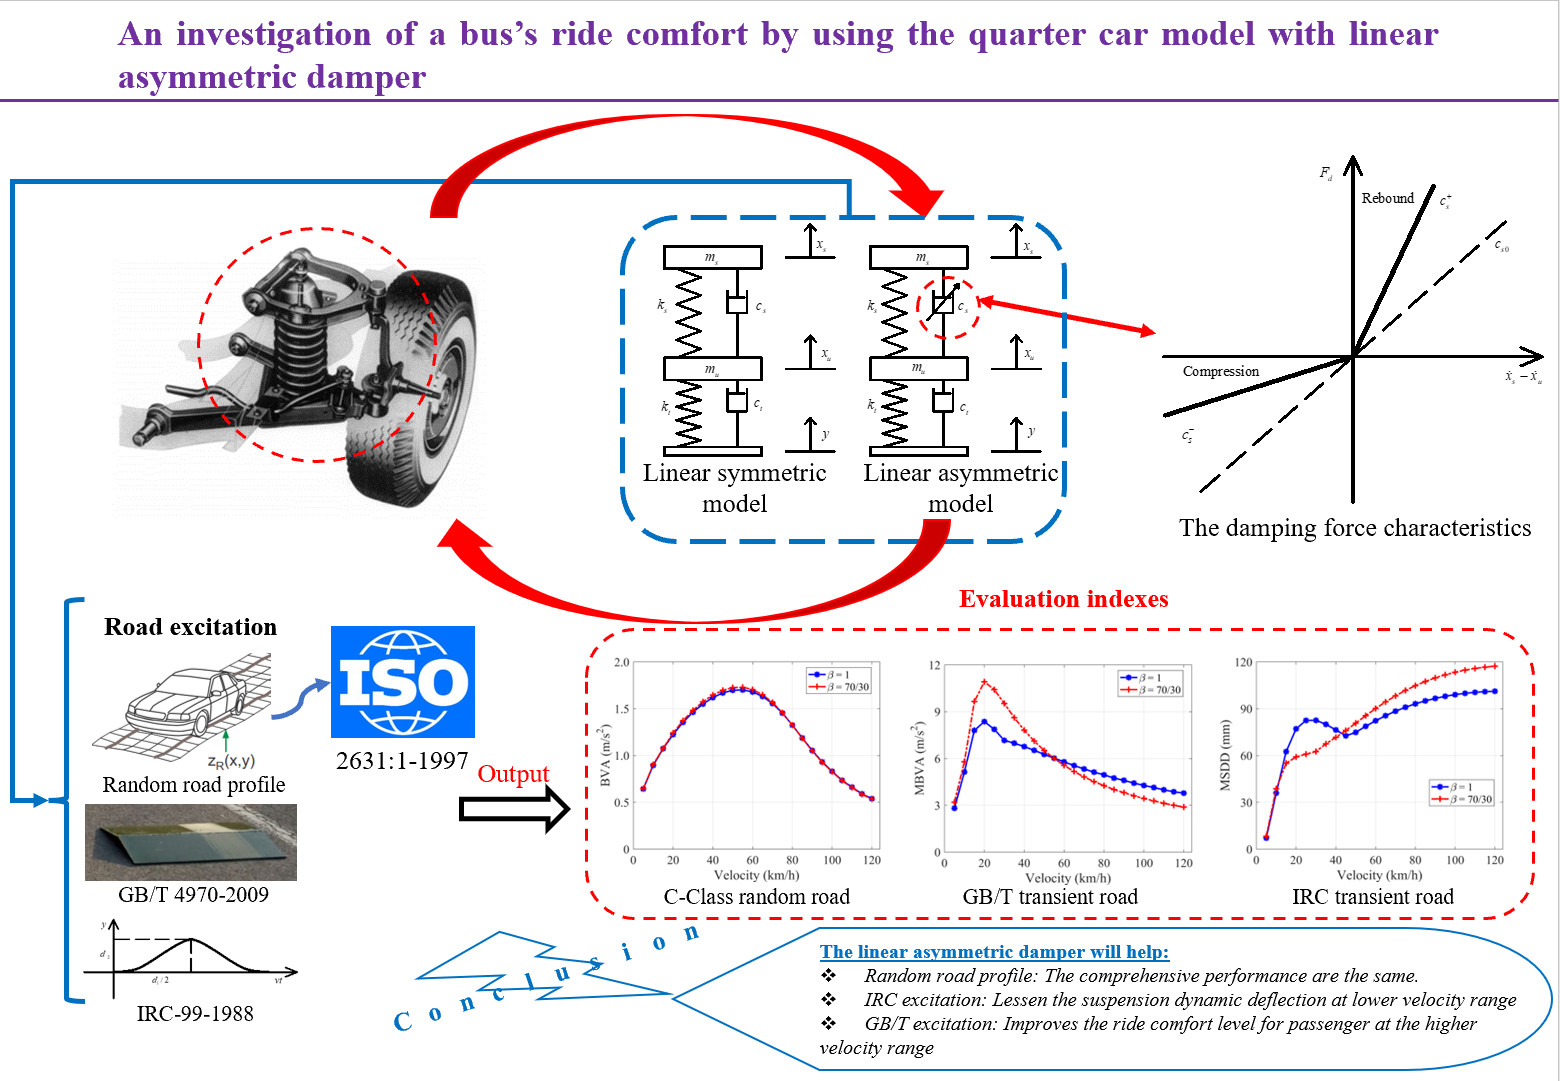 An investigation of a bus’s ride comfort by using the quarter car model with linear asymmetric damper